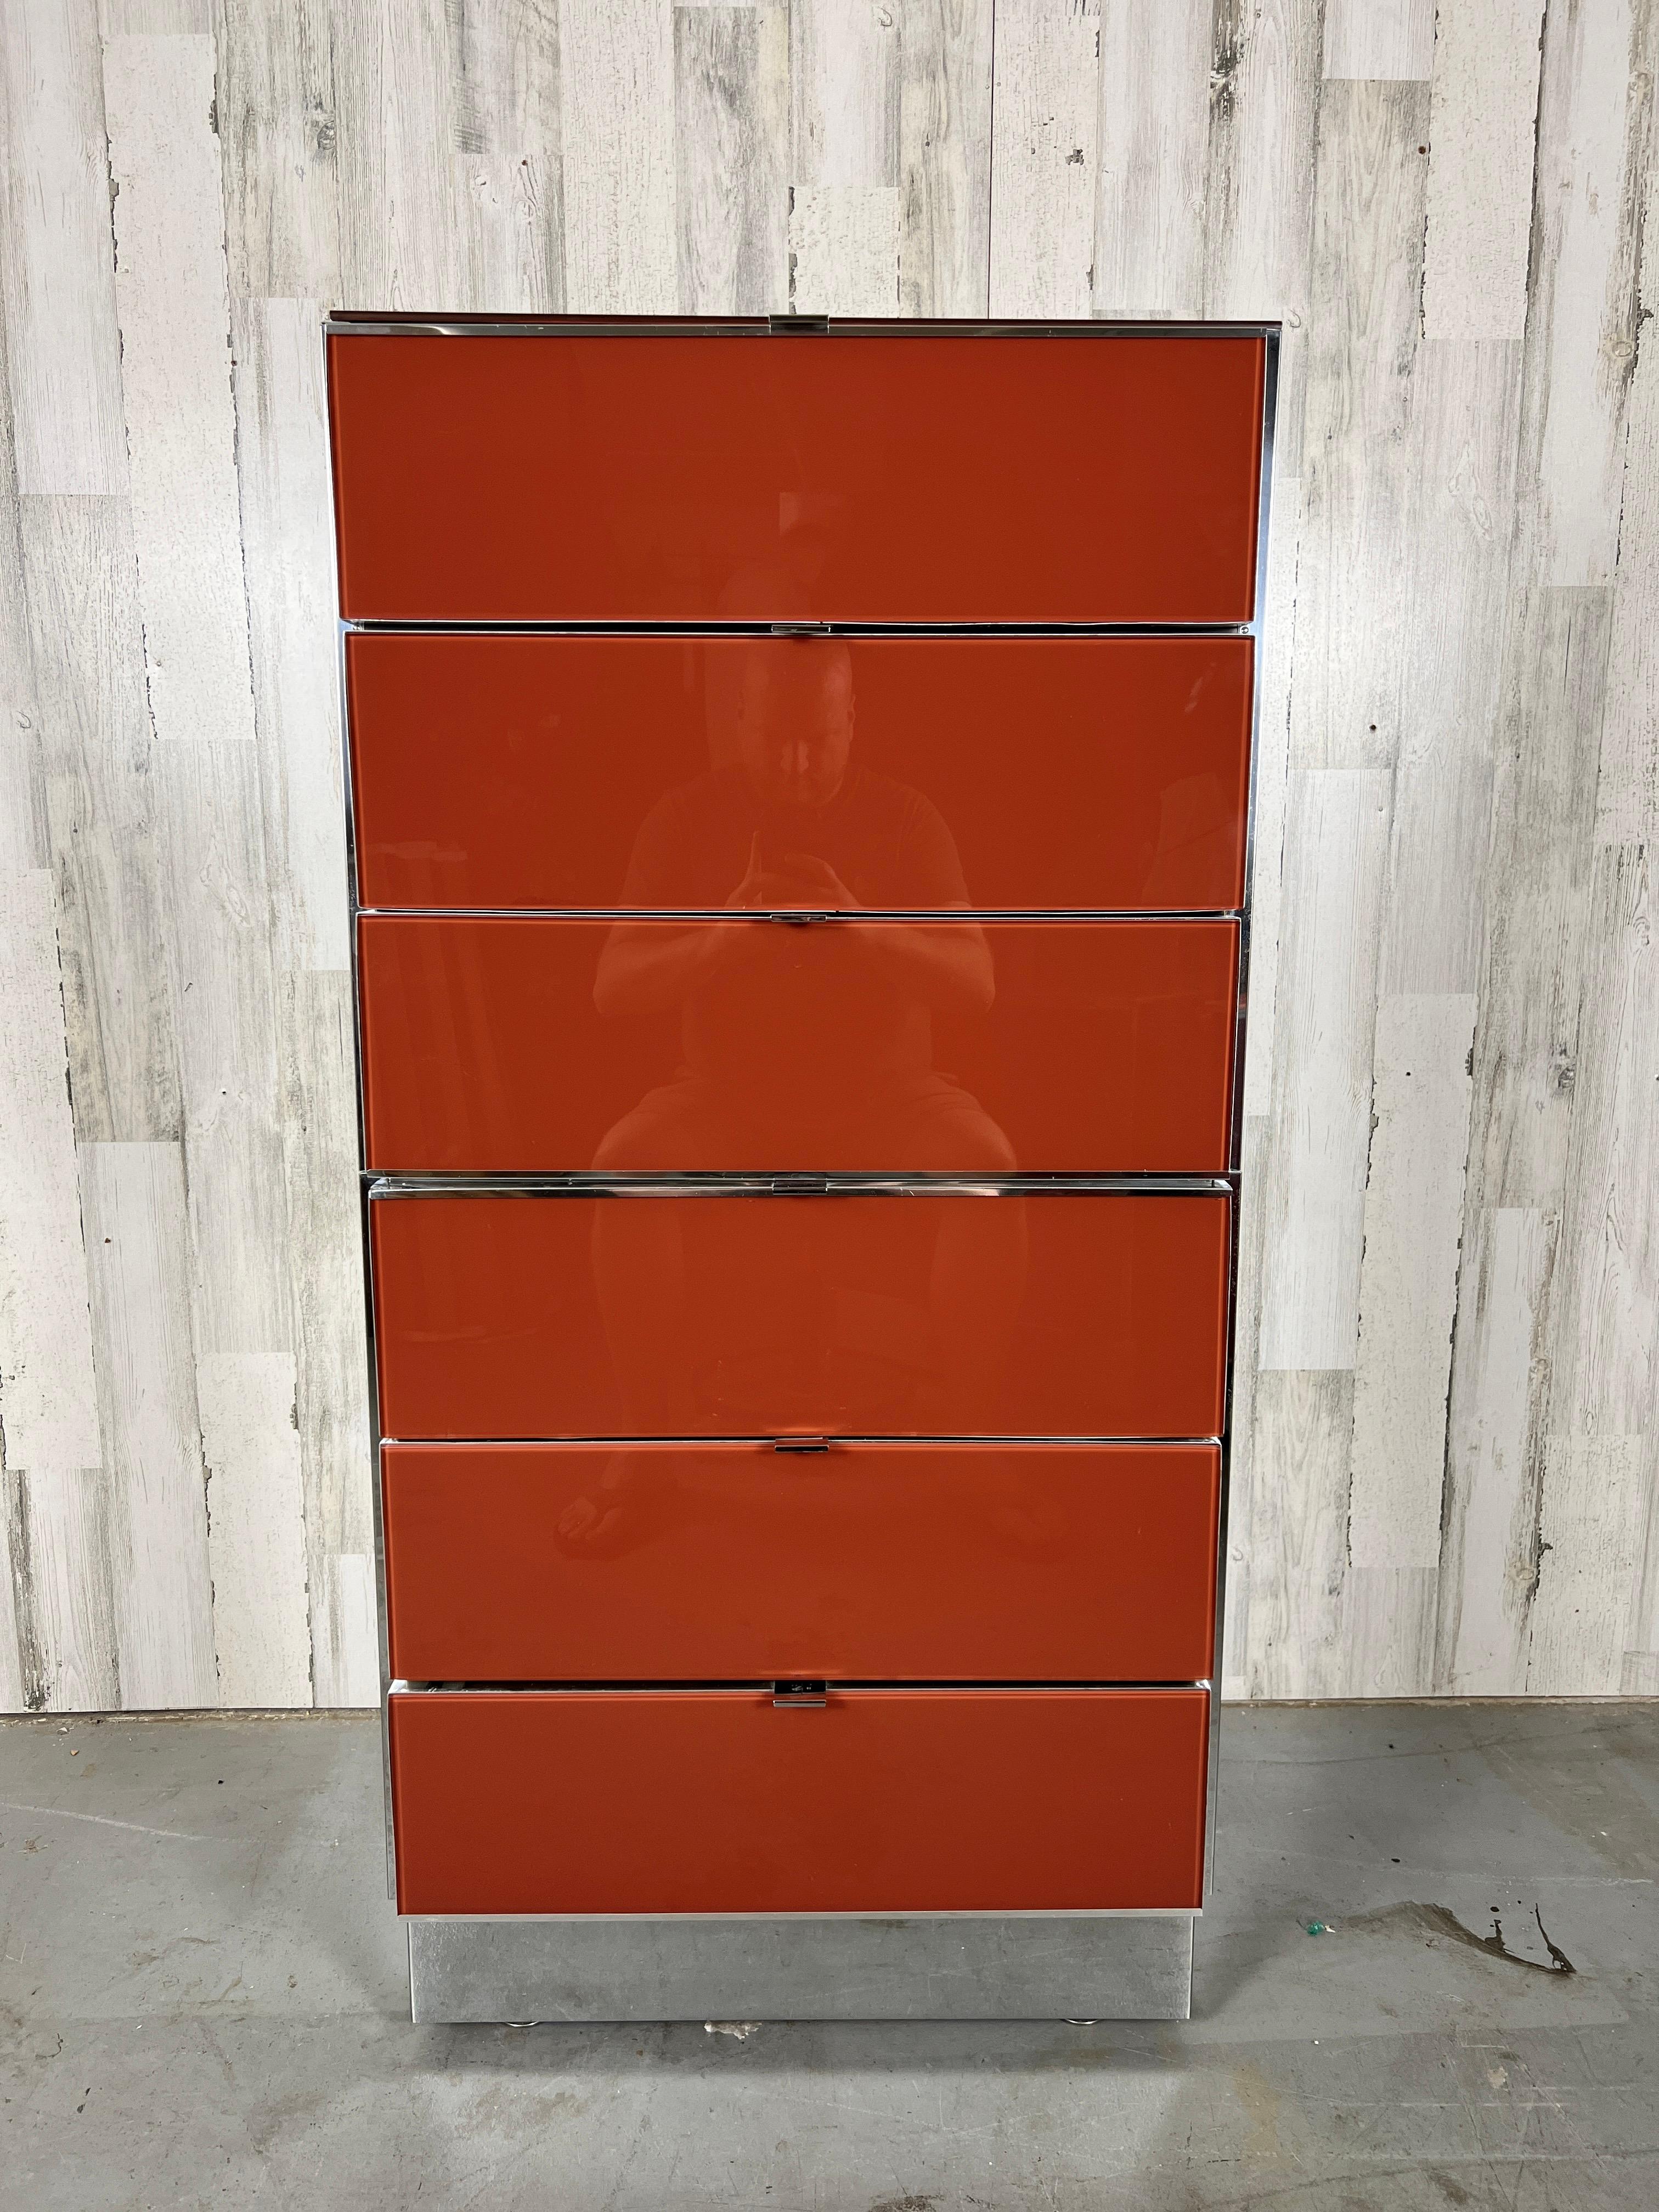 Ello Lacquered glass and chrome high boy dresser. Burnt orange lacquered glass with shiny chrome sides, trim, and handles.